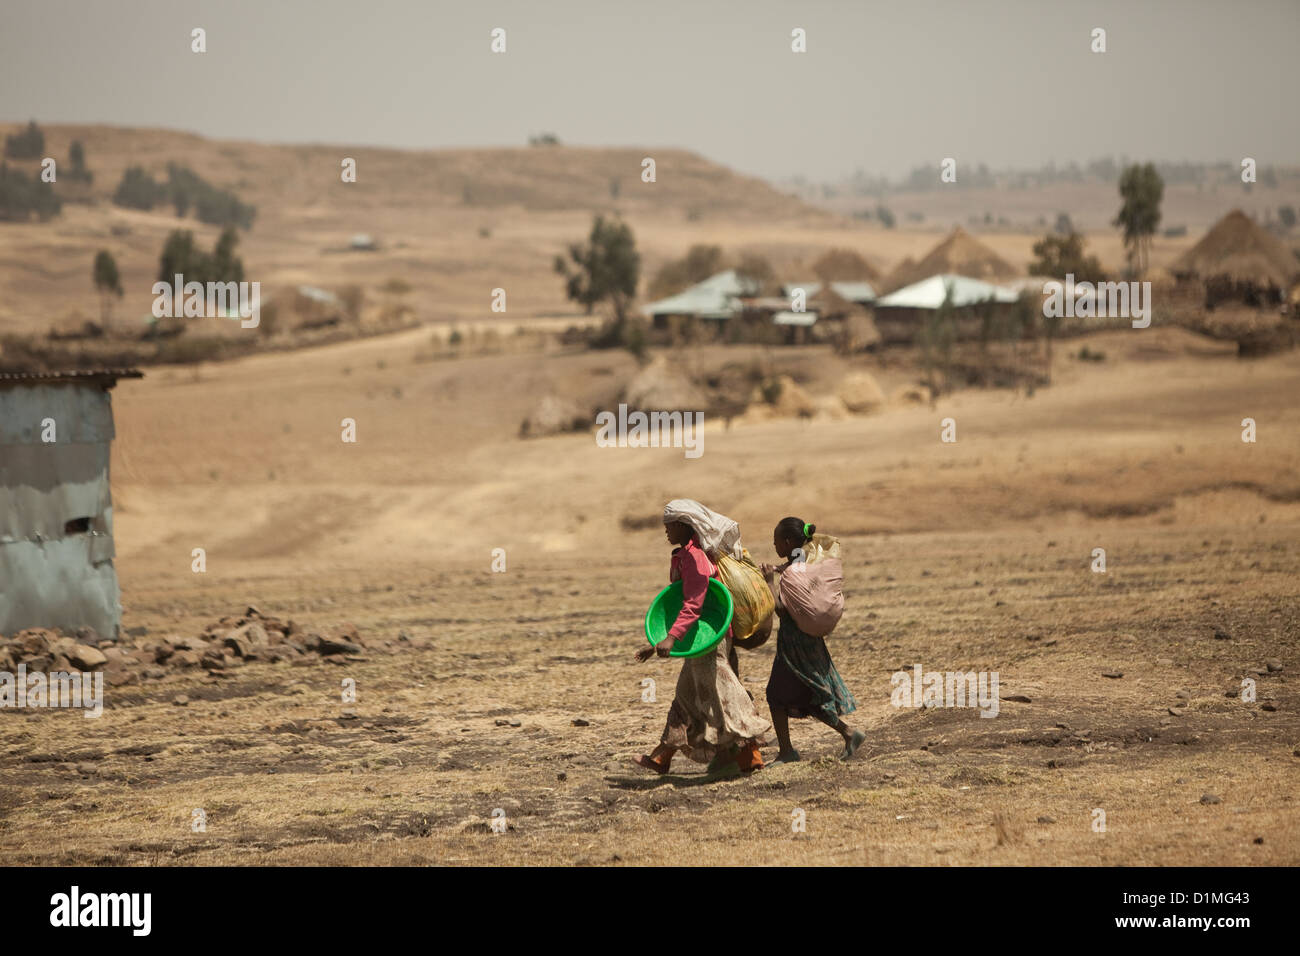 Villagers walk through rural eastern Ethiopia, Horn of Africa. Stock Photo